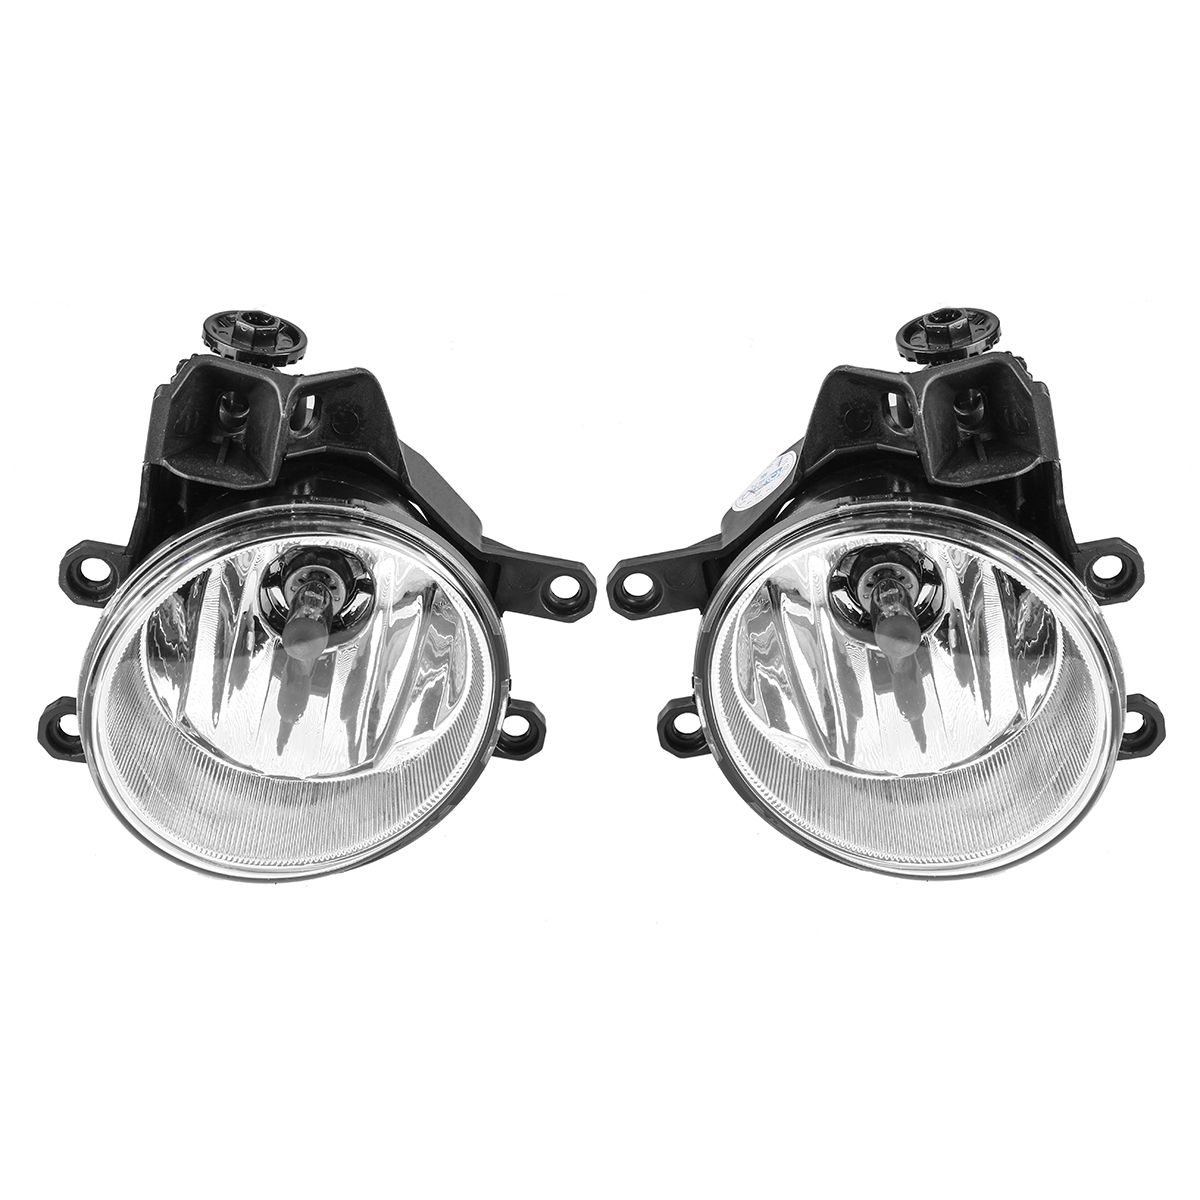 2Pcs-Car-Front-Bumper-Fog-Light-Lamps-With-Harness-Wiring-For-Toyota-Hilux-Revo-M70-M80-2015-2018-1679386